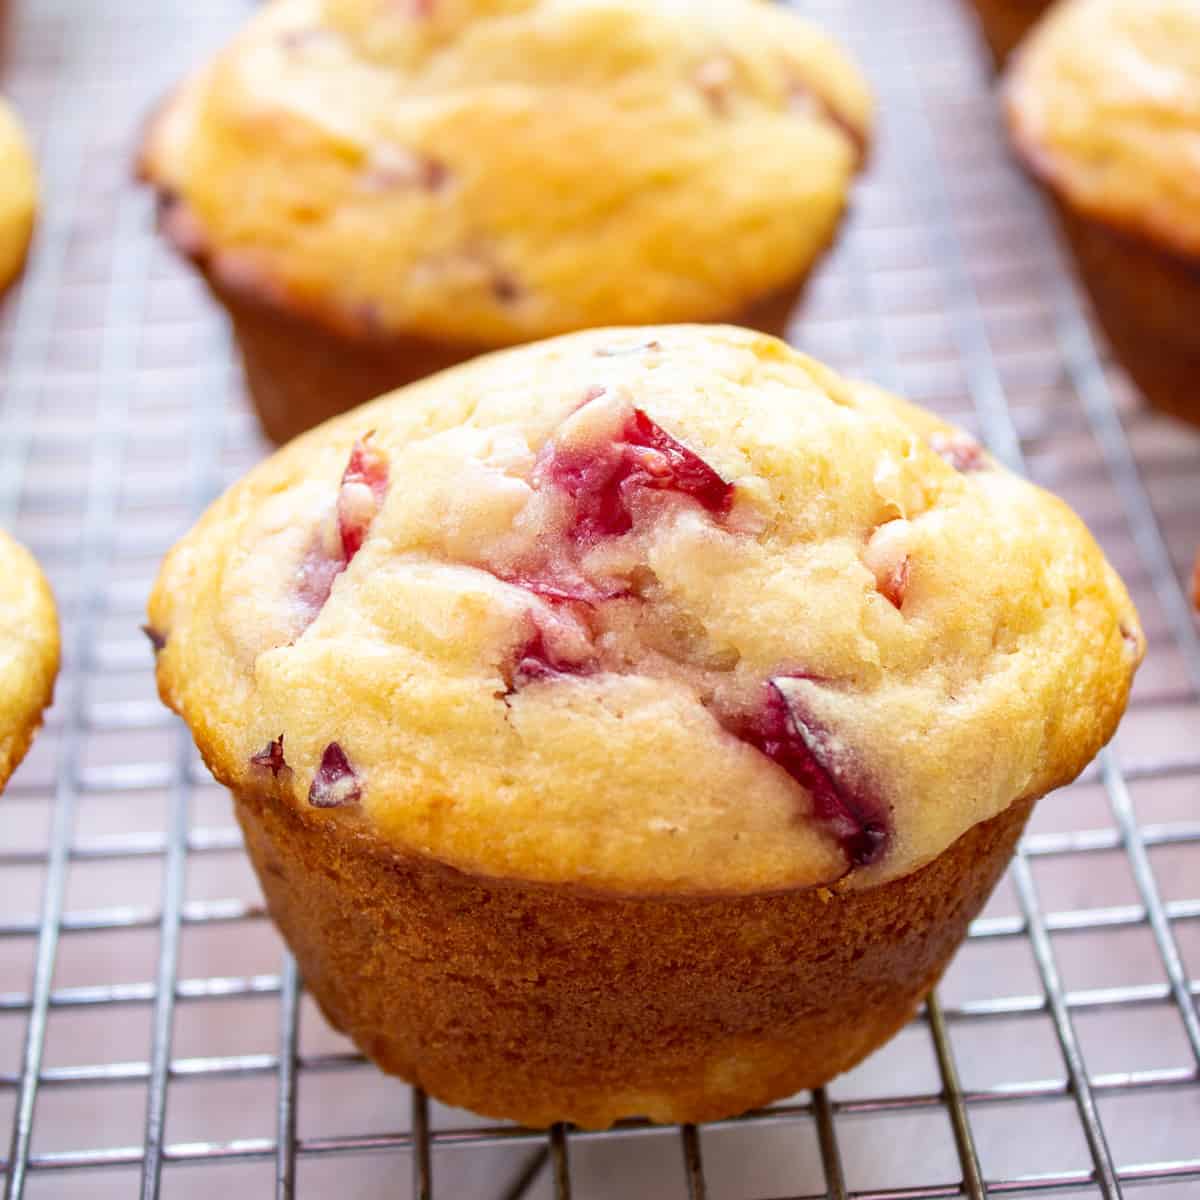 A muffin filled with cherries on a baking rack.